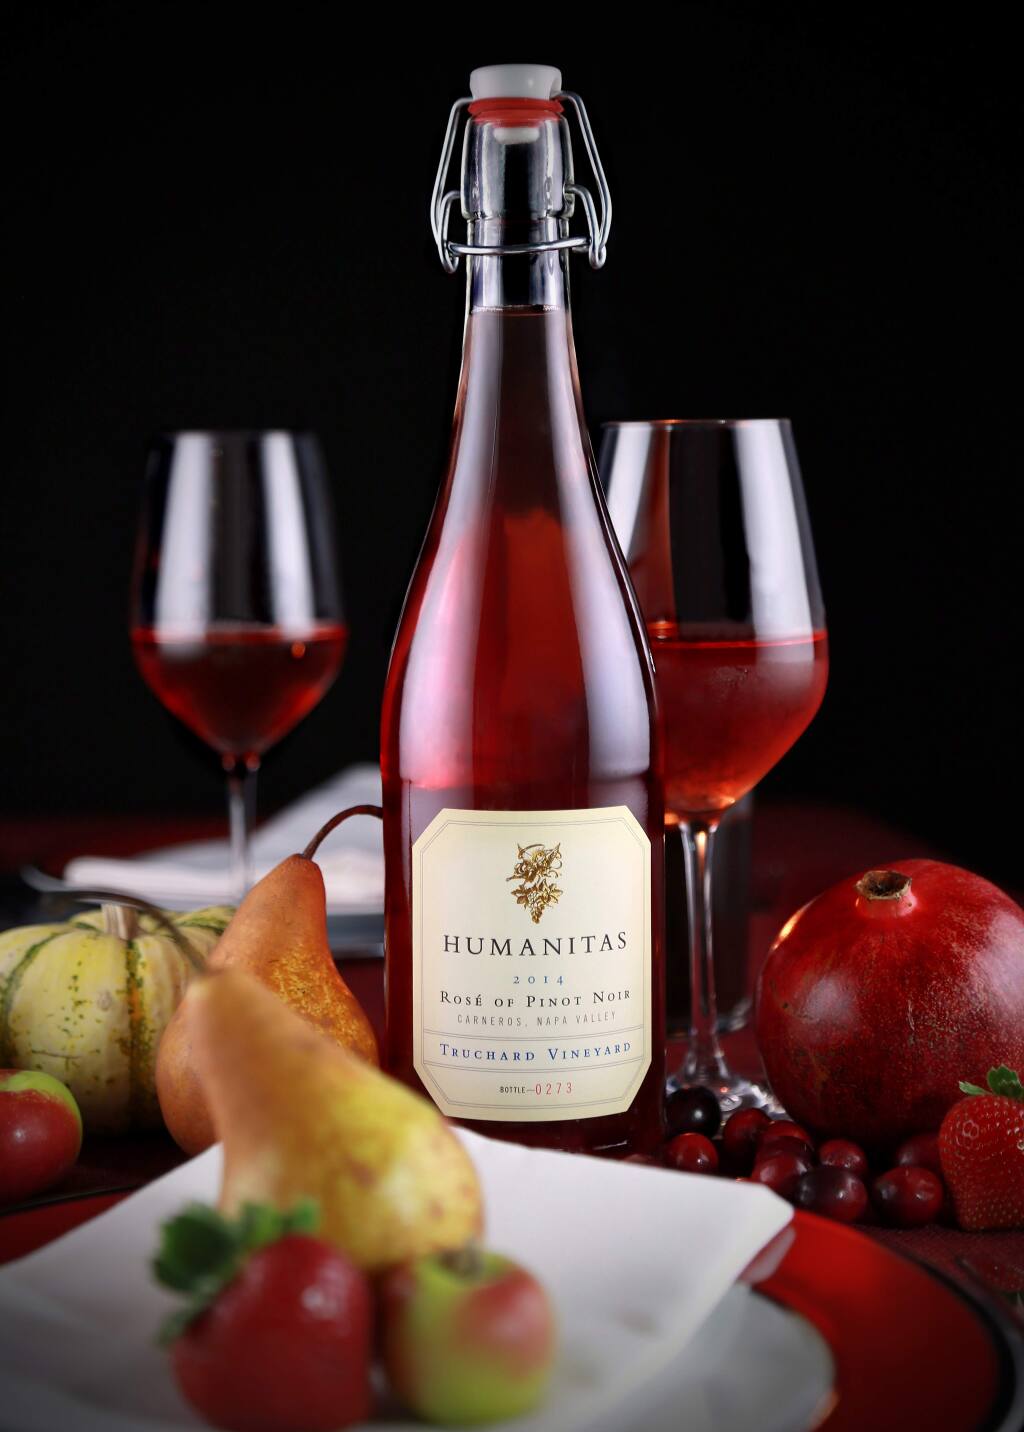 Humanitas Wines of Napa Valley is releasing a rose of pinot noir wine bottled with a swing-top cap. (Will Bucquoy)